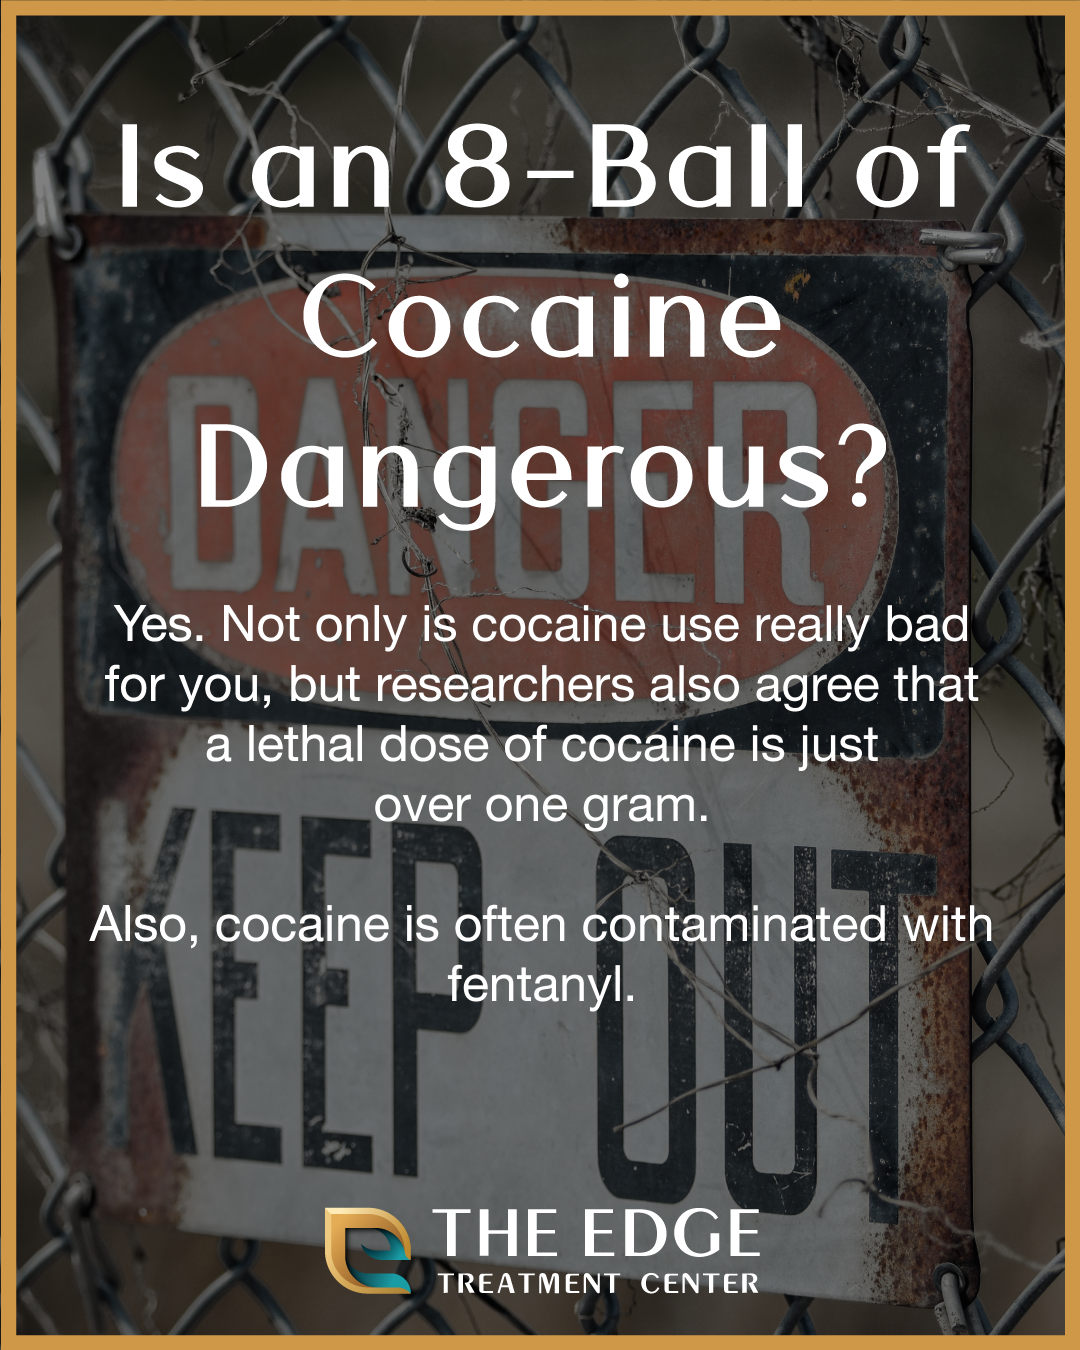 8 Ball of Cocaine: Everything You Need To Know - Oasis Recovery Center